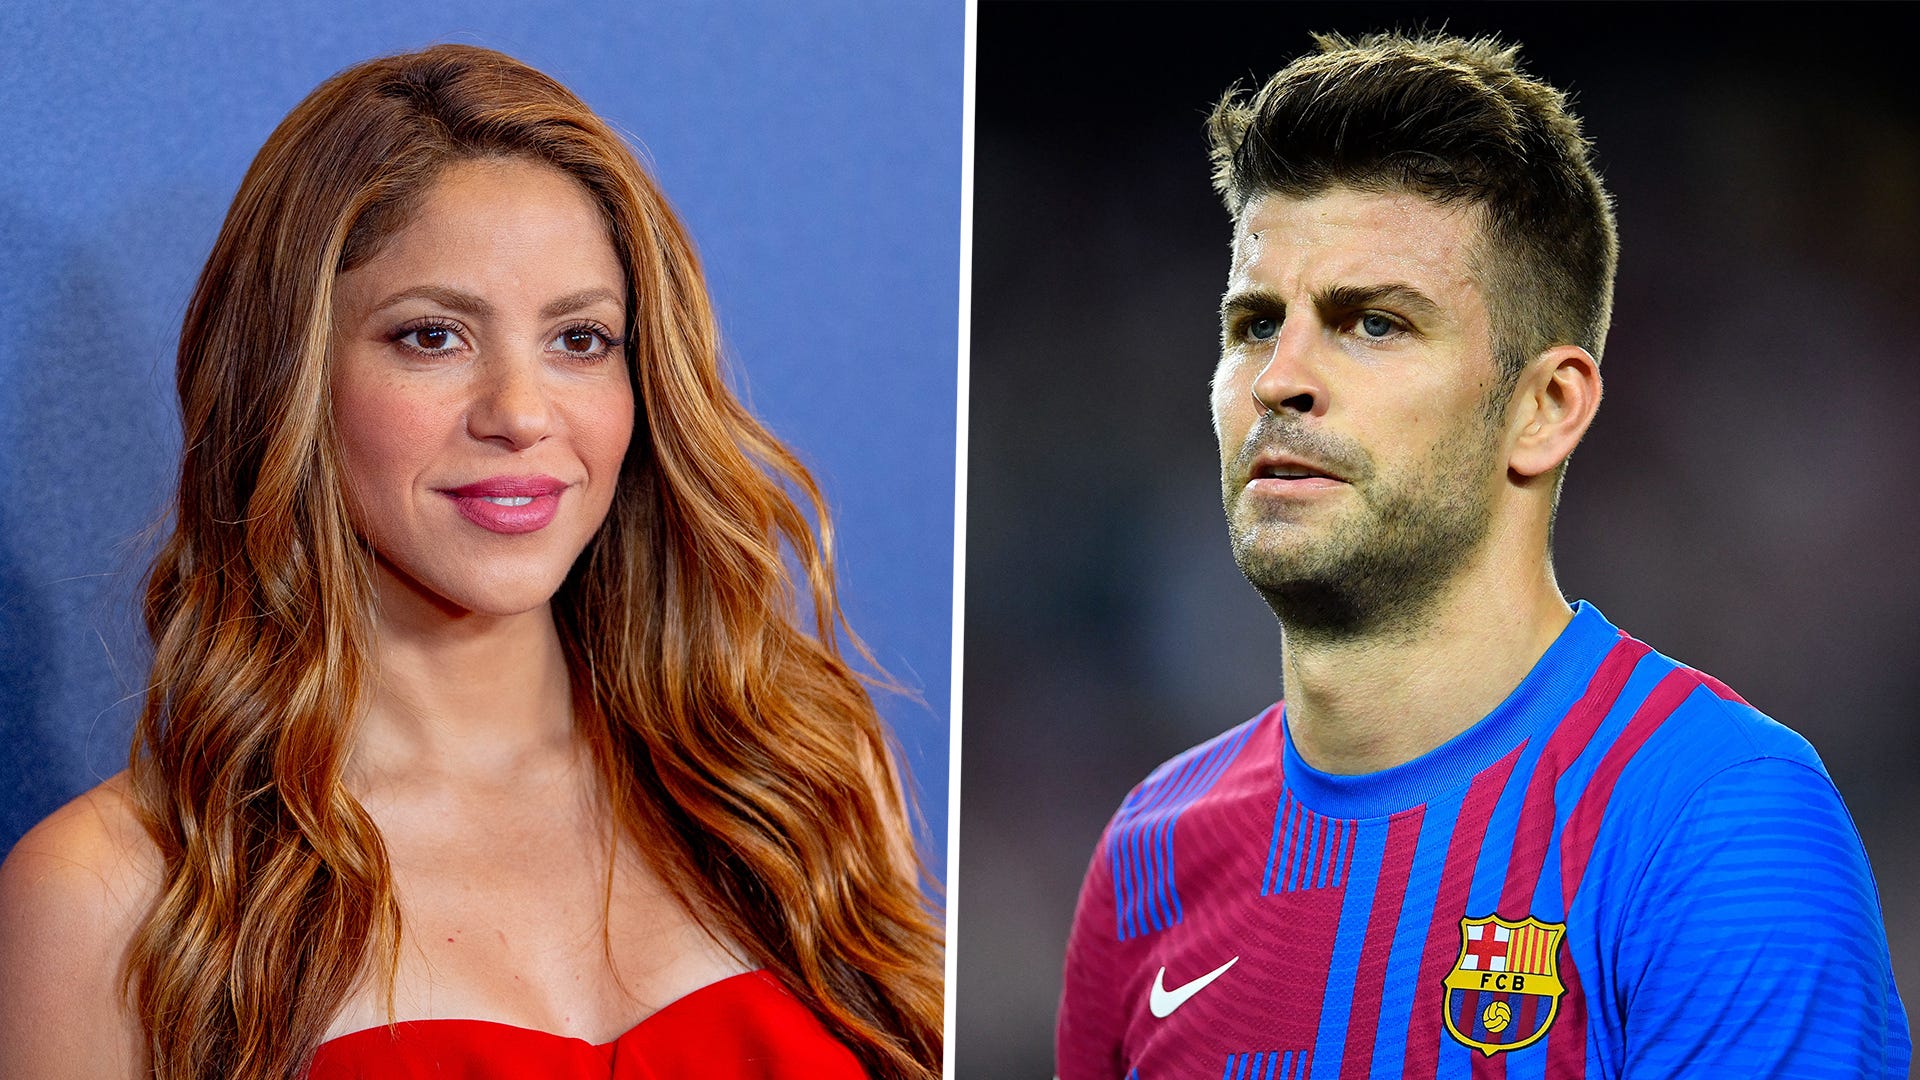 Barcelona defender Pique & Shakira splitting up after 11 years together amid cheating allegations 